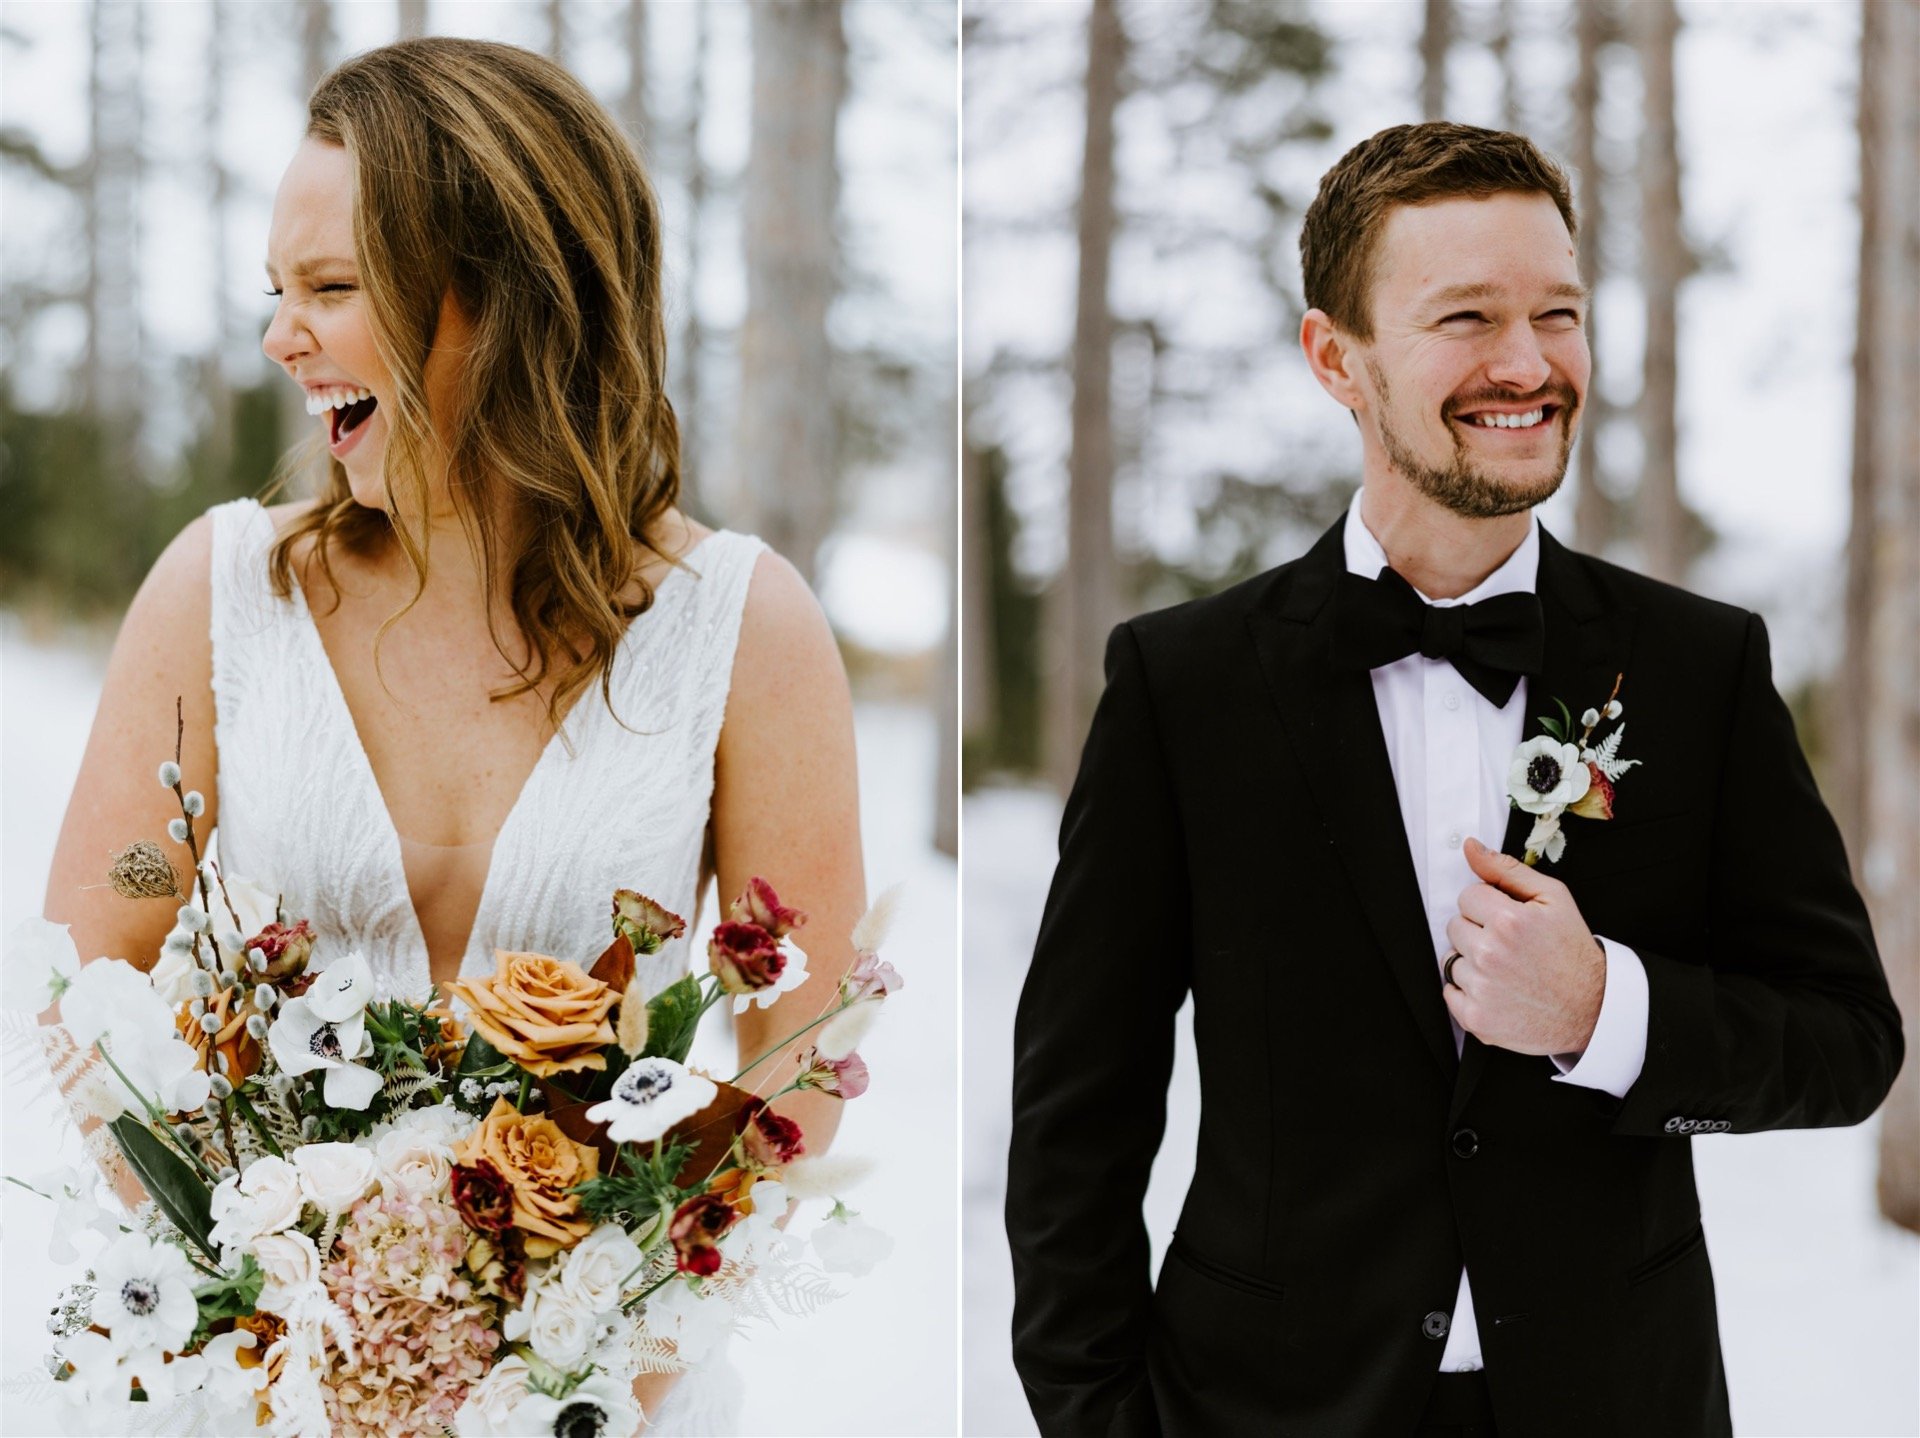 Pinewood Winter Wedding with Lahzeh Photography